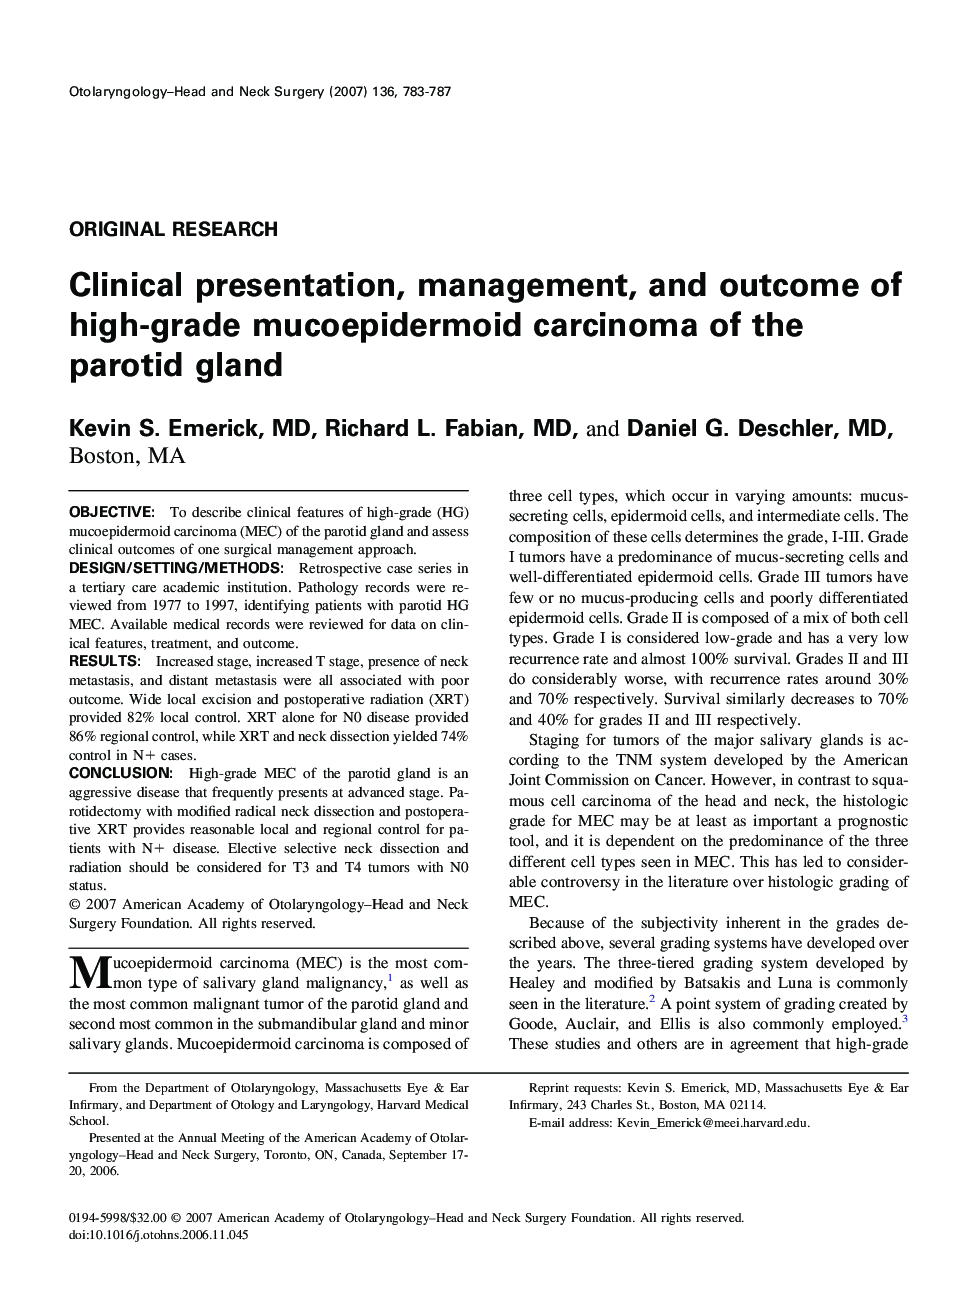 Clinical presentation, management, and outcome of high-grade mucoepidermoid carcinoma of the parotid gland